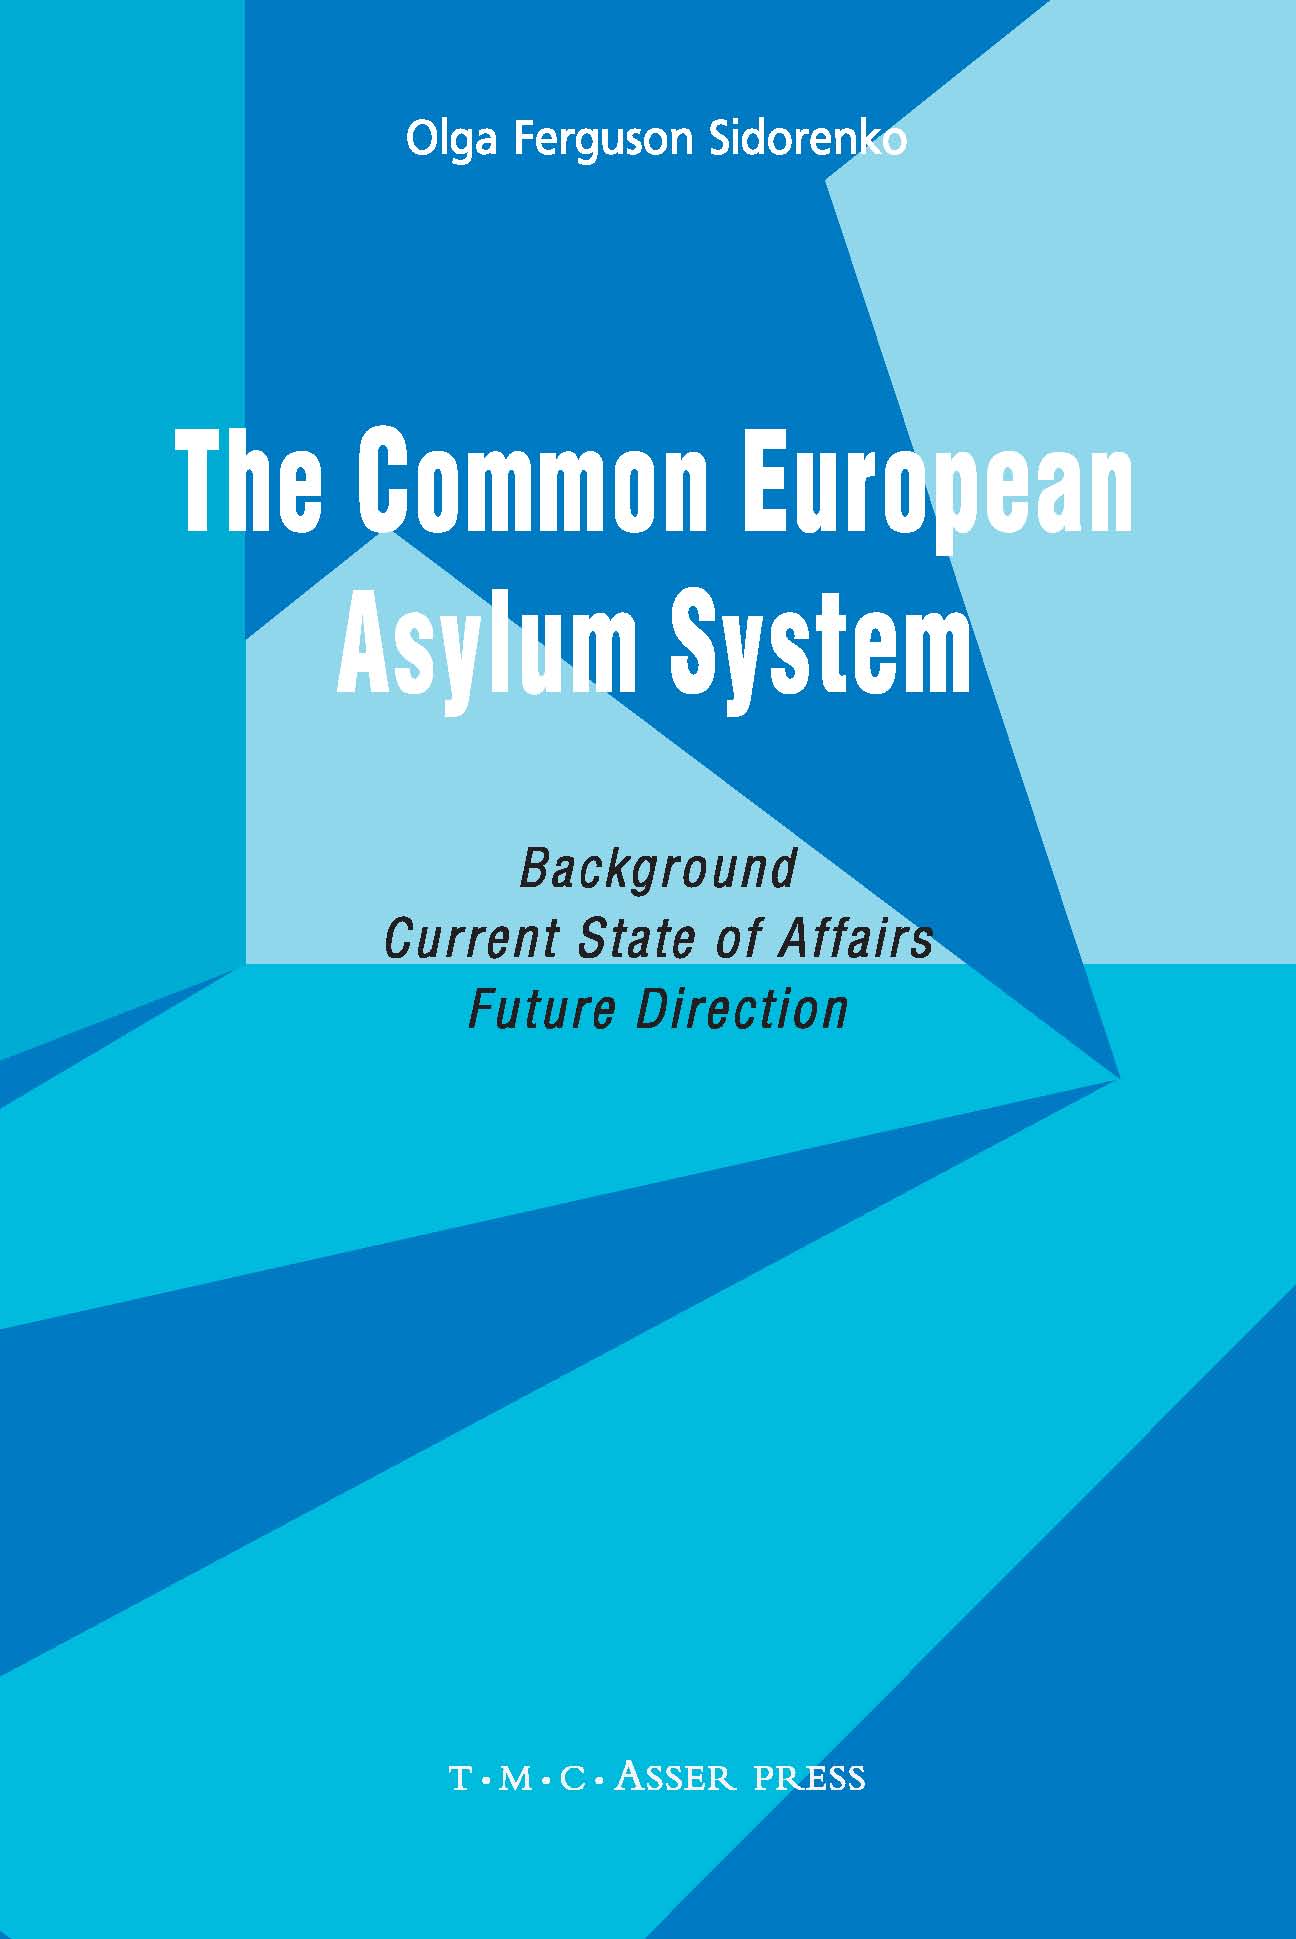 The Common European Asylum System - Background, Current State of Affairs, Future Direction